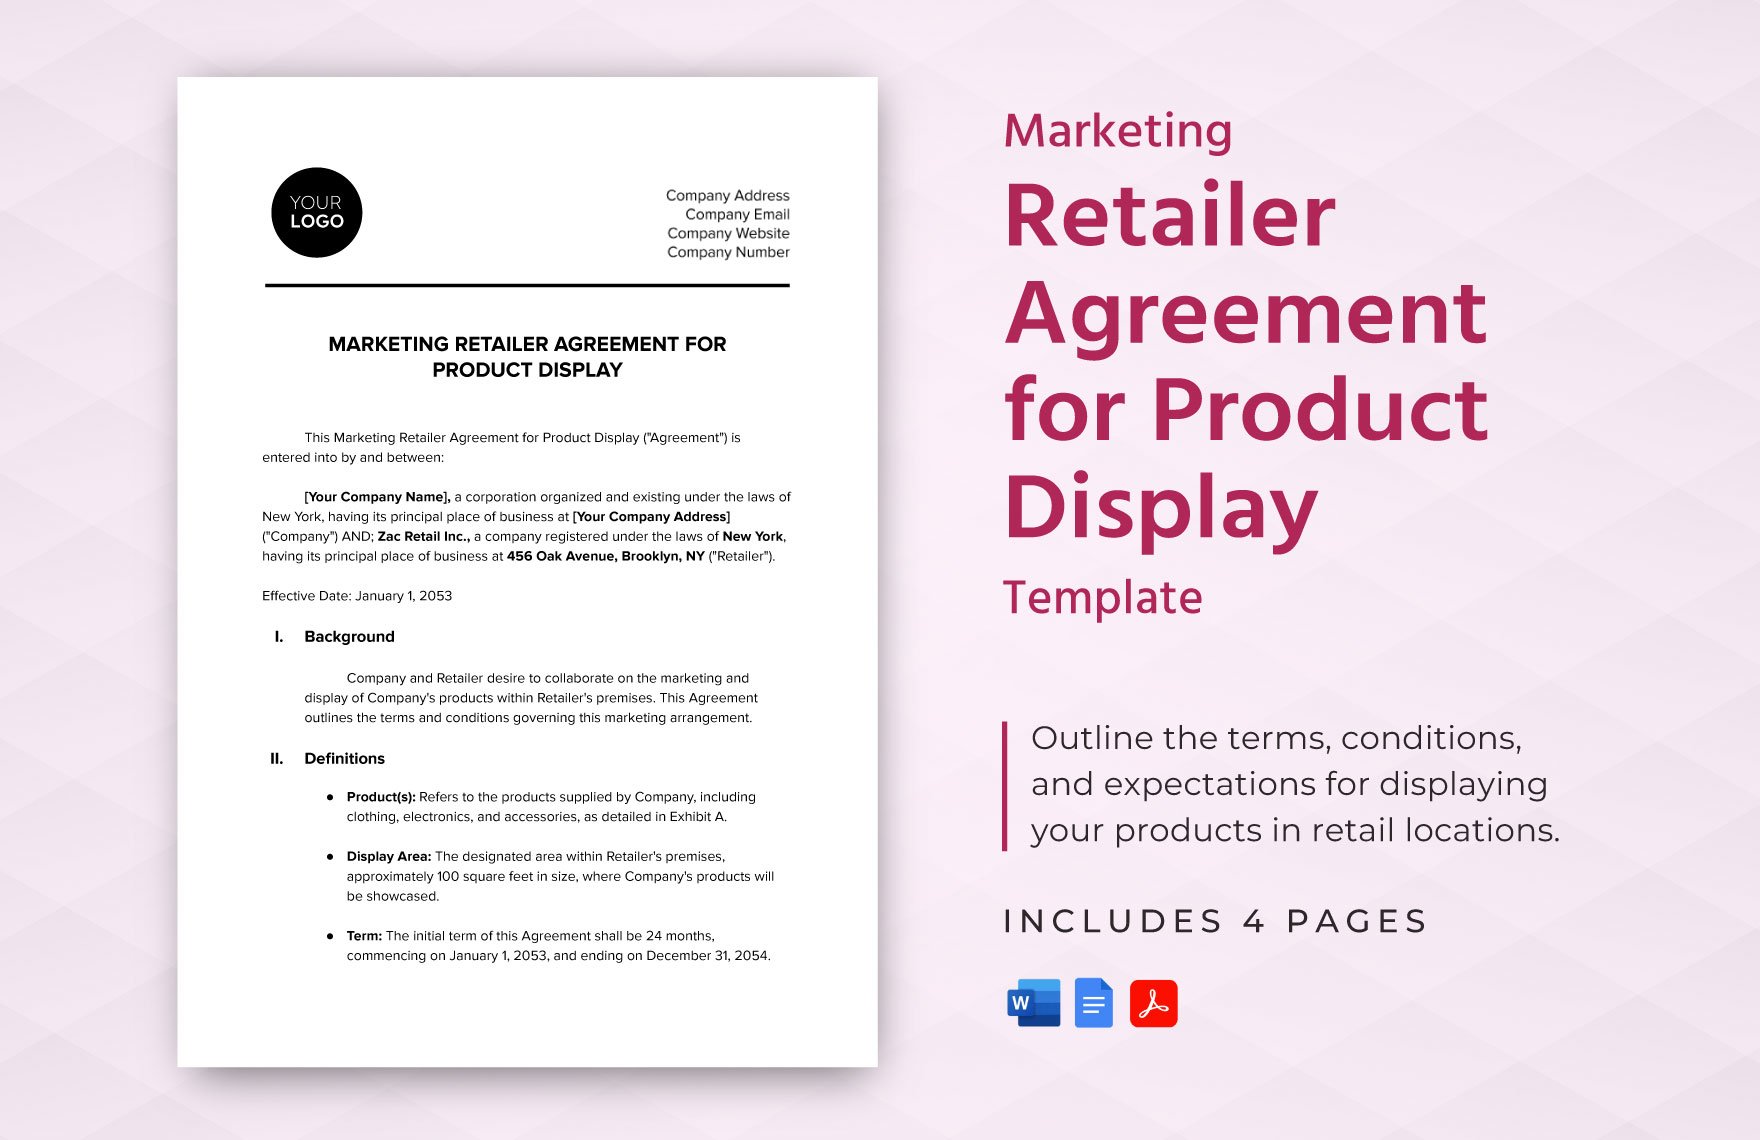 Marketing Retailer Agreement for Product Display Template